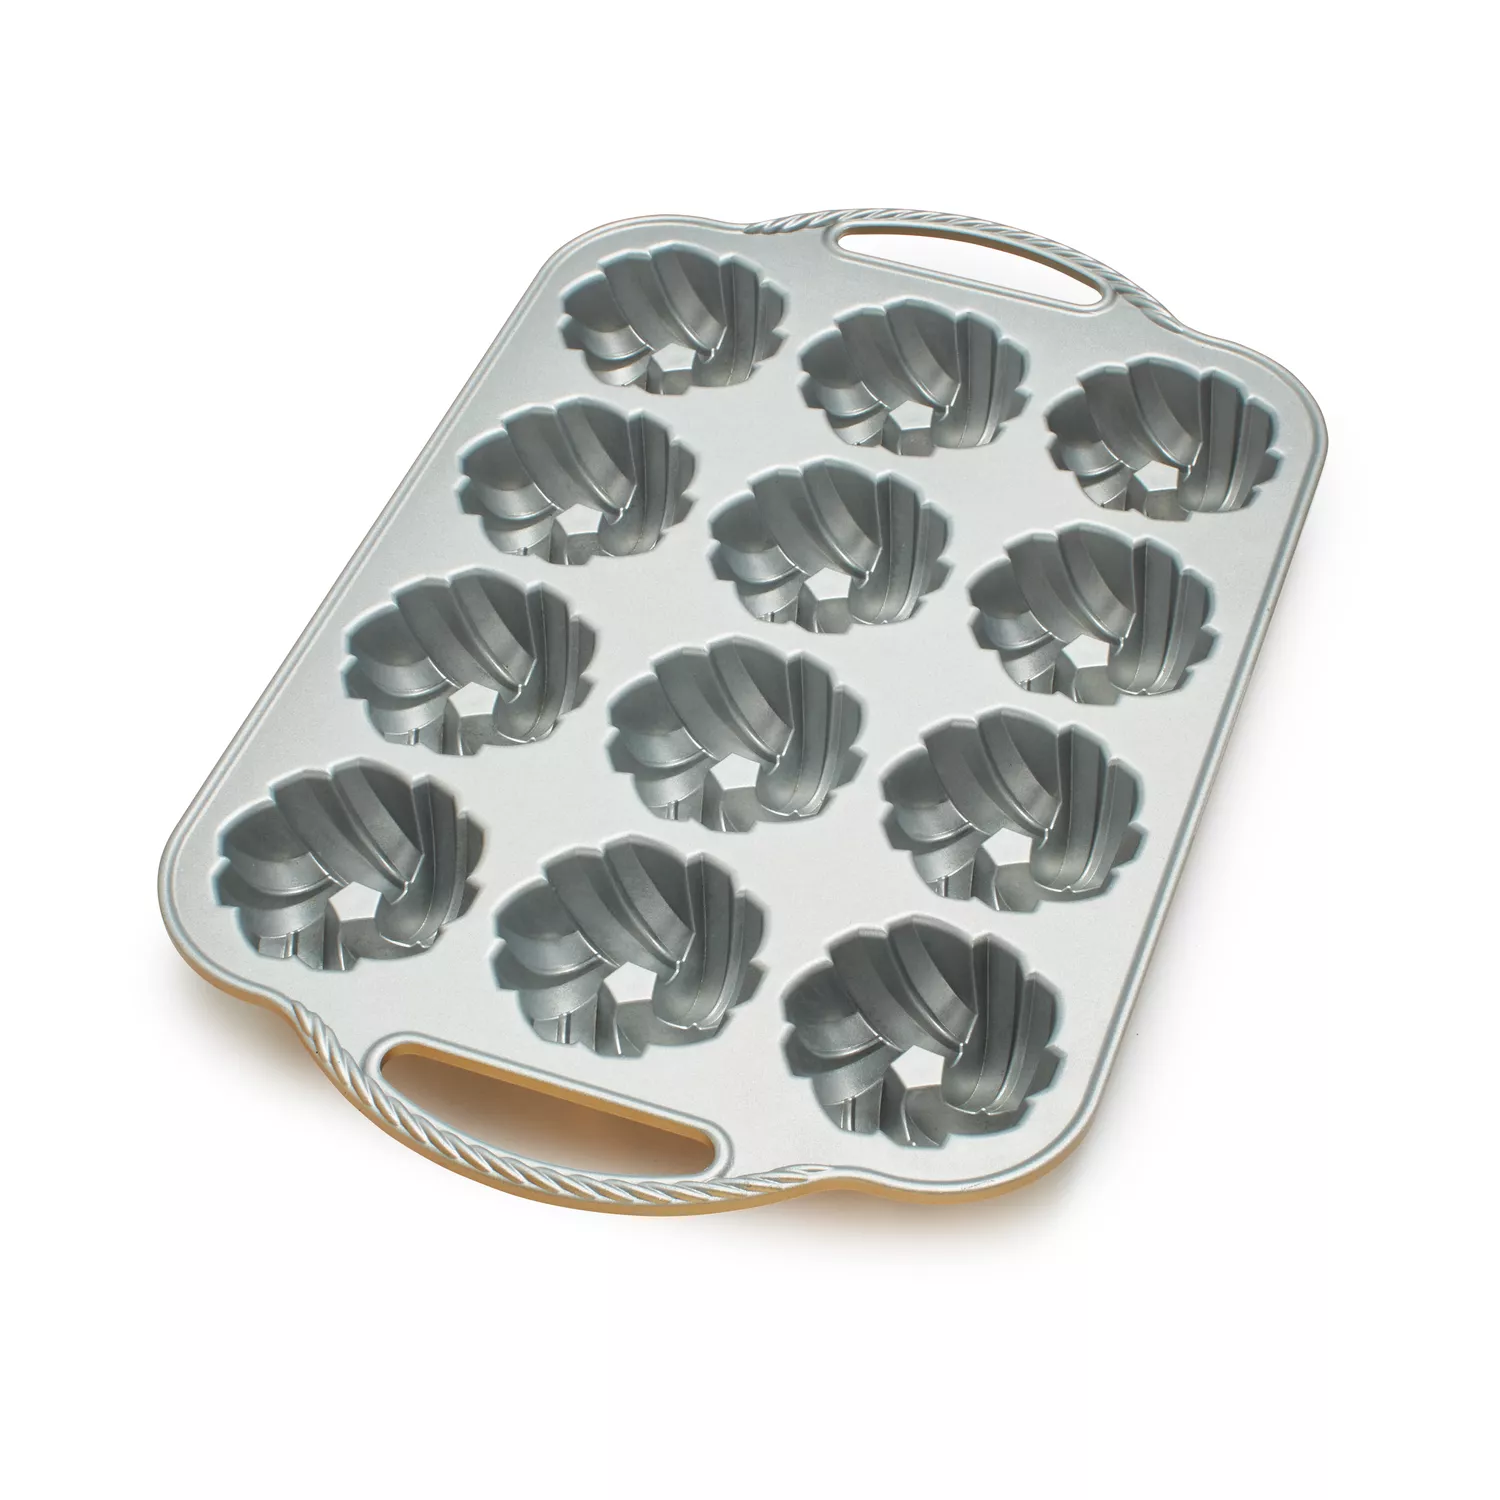 Nordic Ware 75th anniversary braided bundt baking tin from Nordic